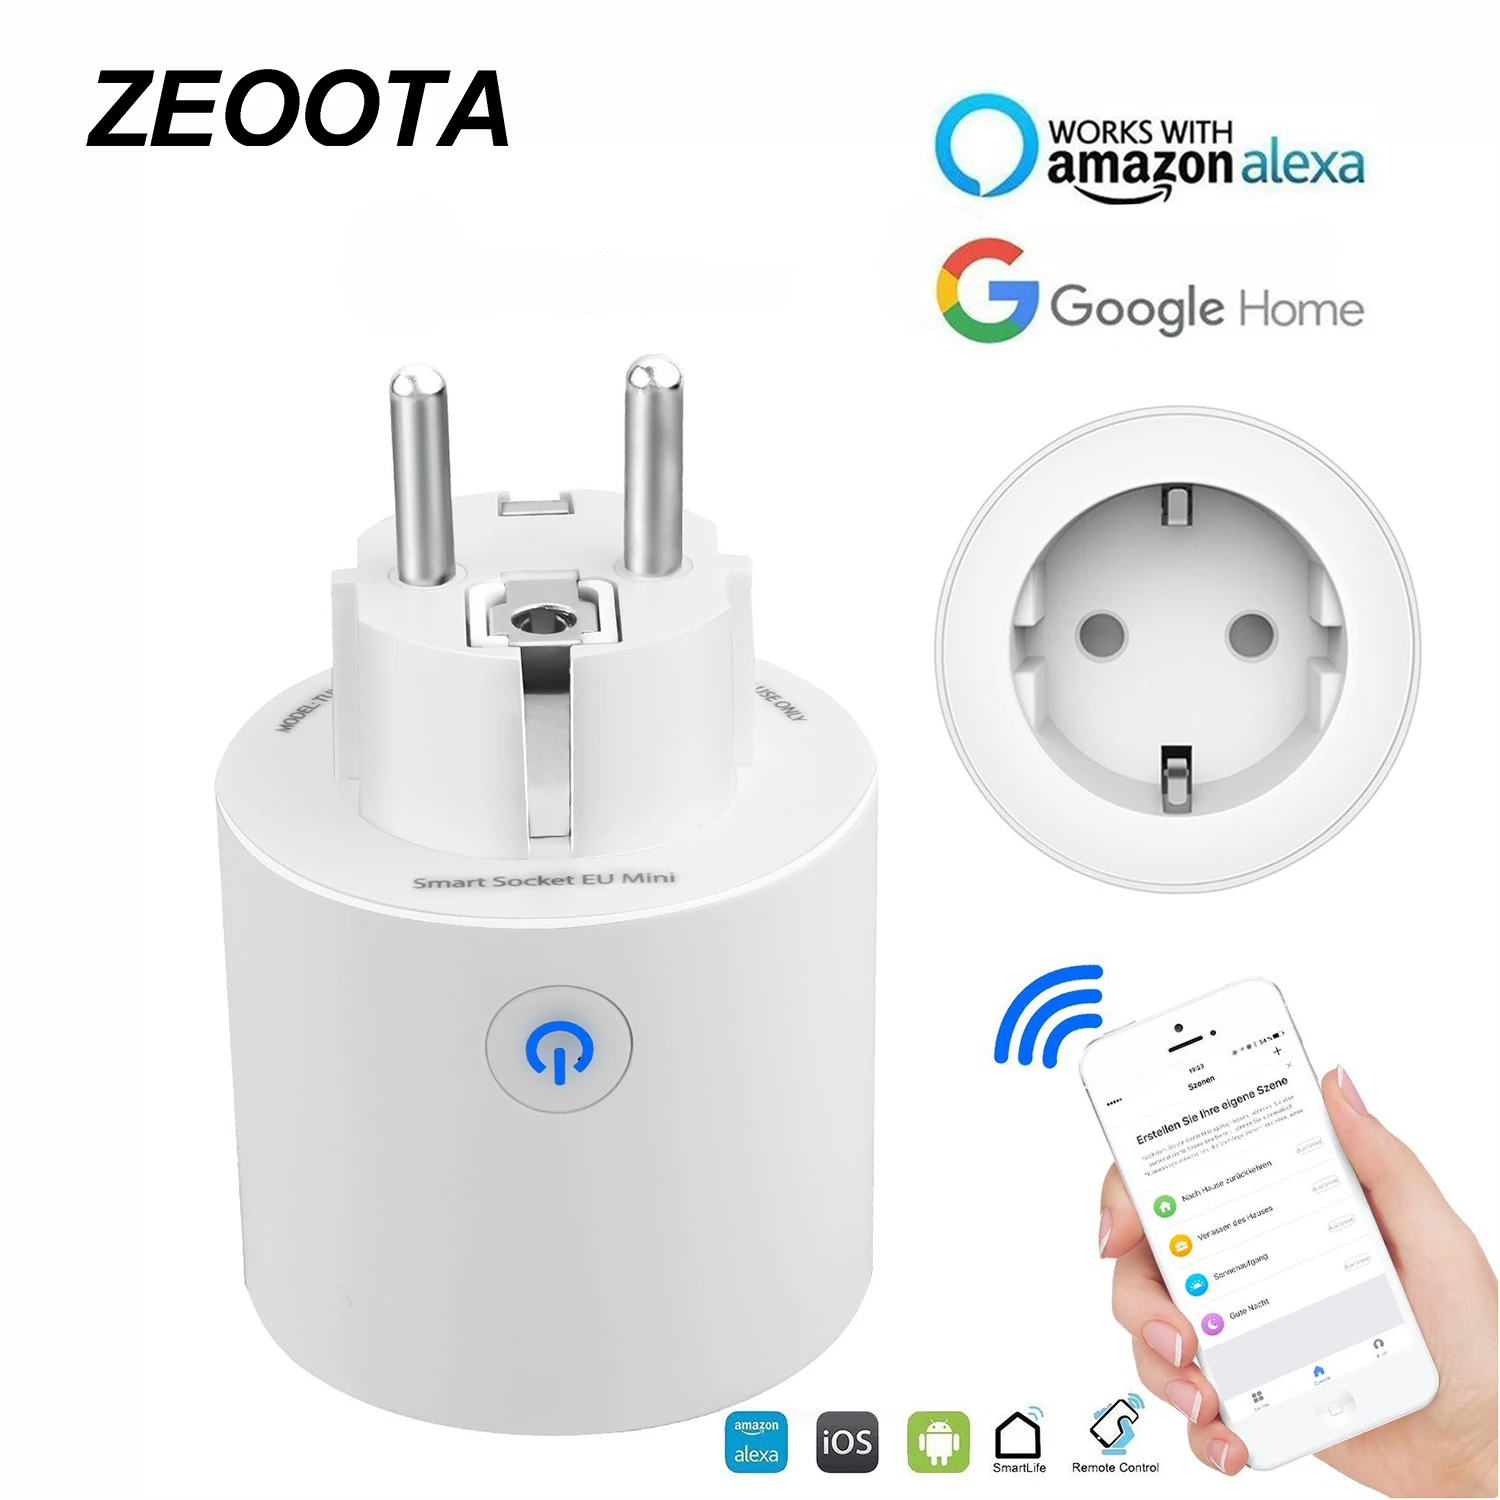 

Wifi Smart Power Plug EU Outlet Sockets Remote Voice/APP Control Timing Function Homekit Works with Amazon Alexa Google Home